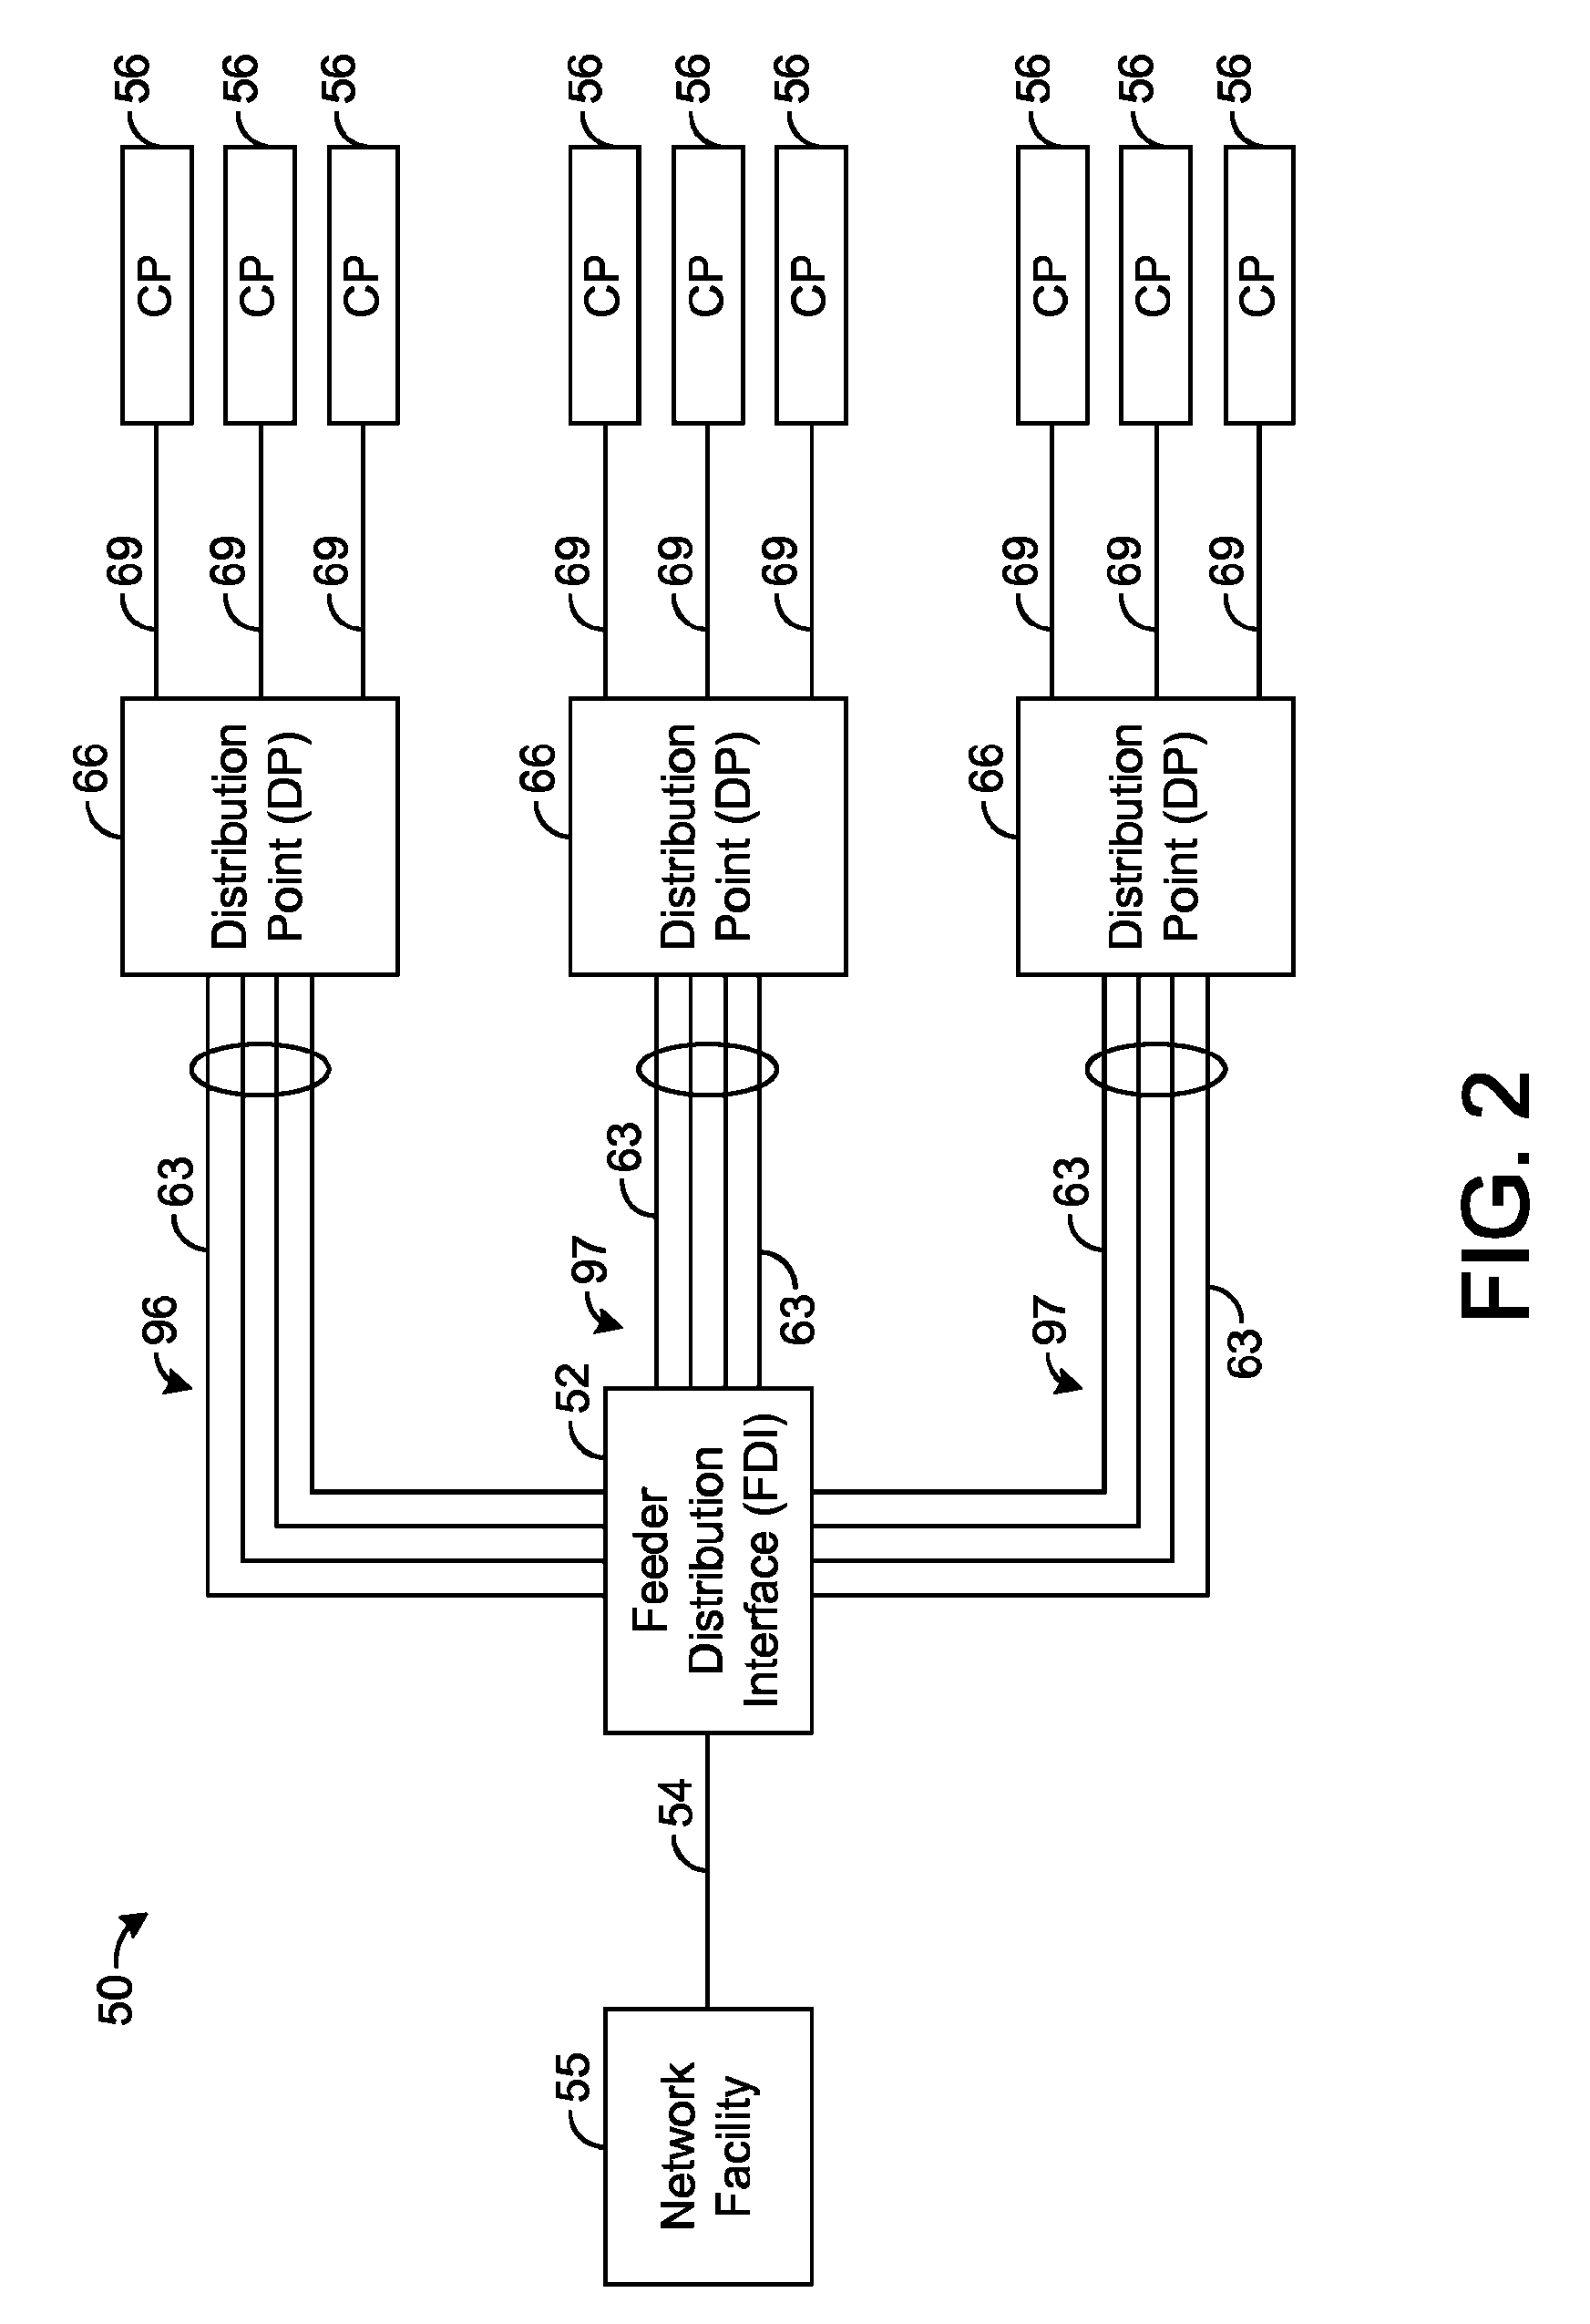 Systems and methods for communicating with multiple distribution points of a network